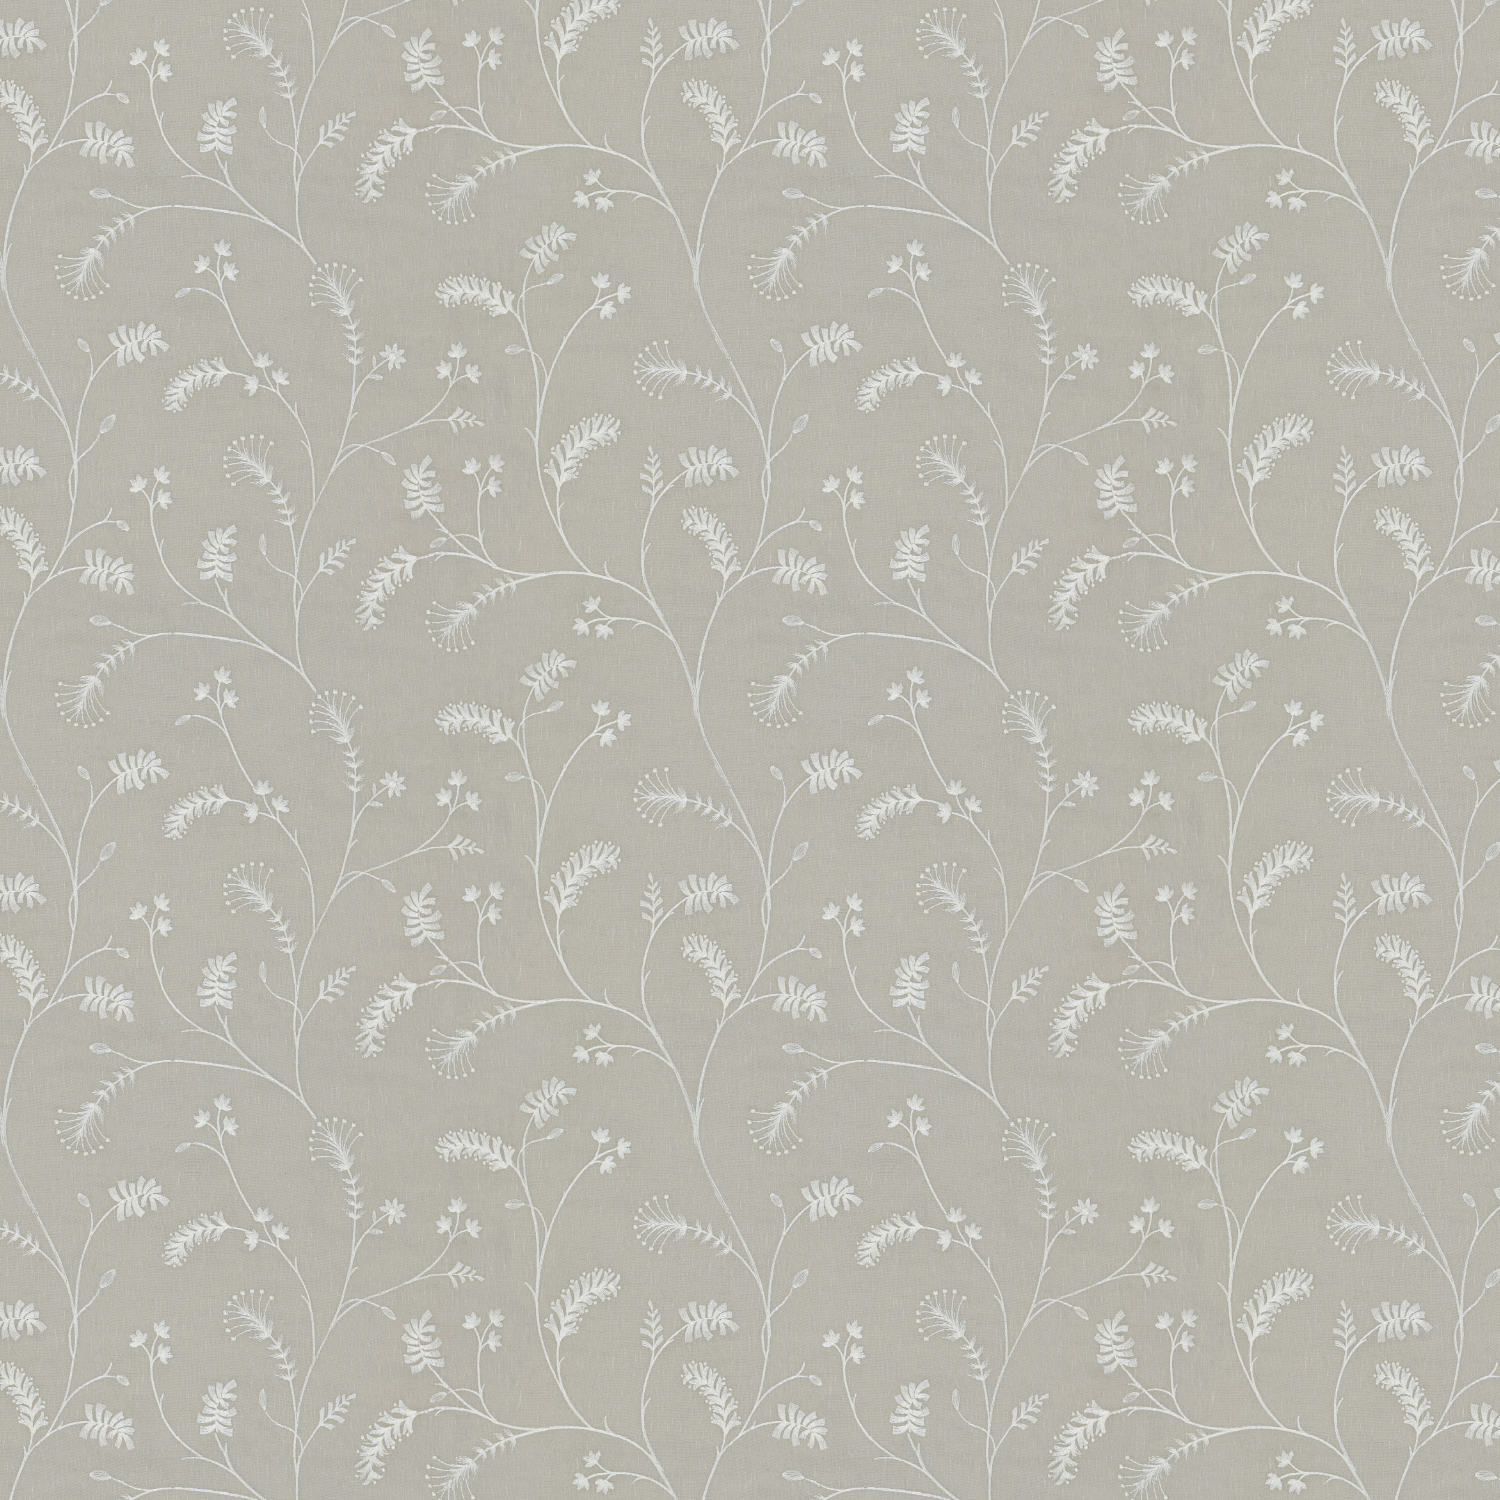 Willowbell Oatmeal Fabric